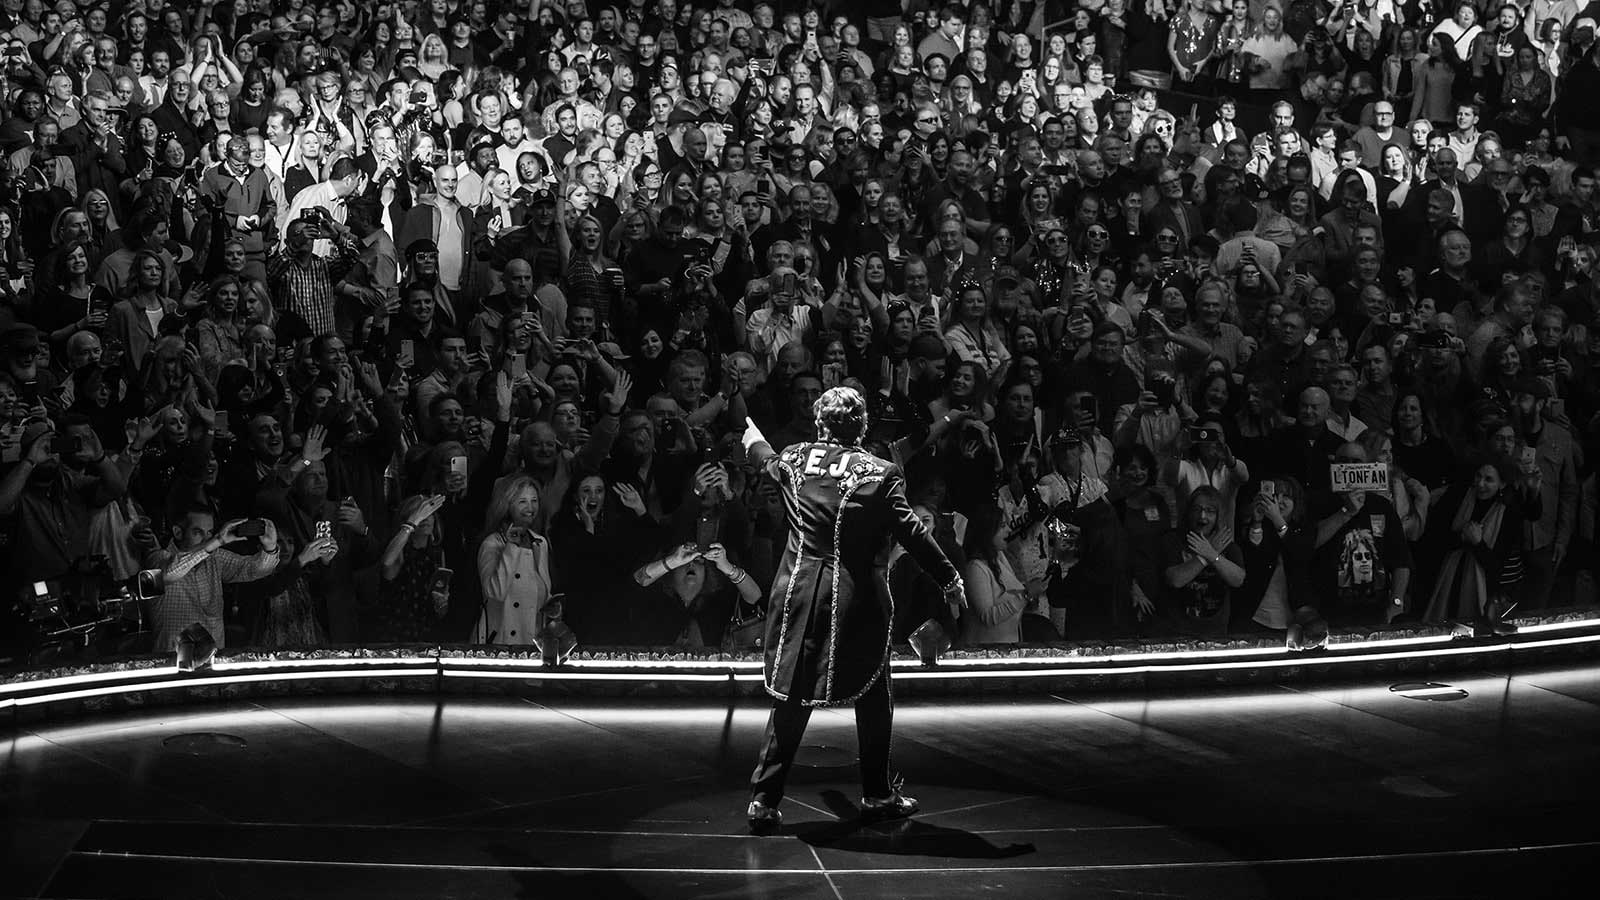 Black and white photograph of Elton John in front of a large crowd